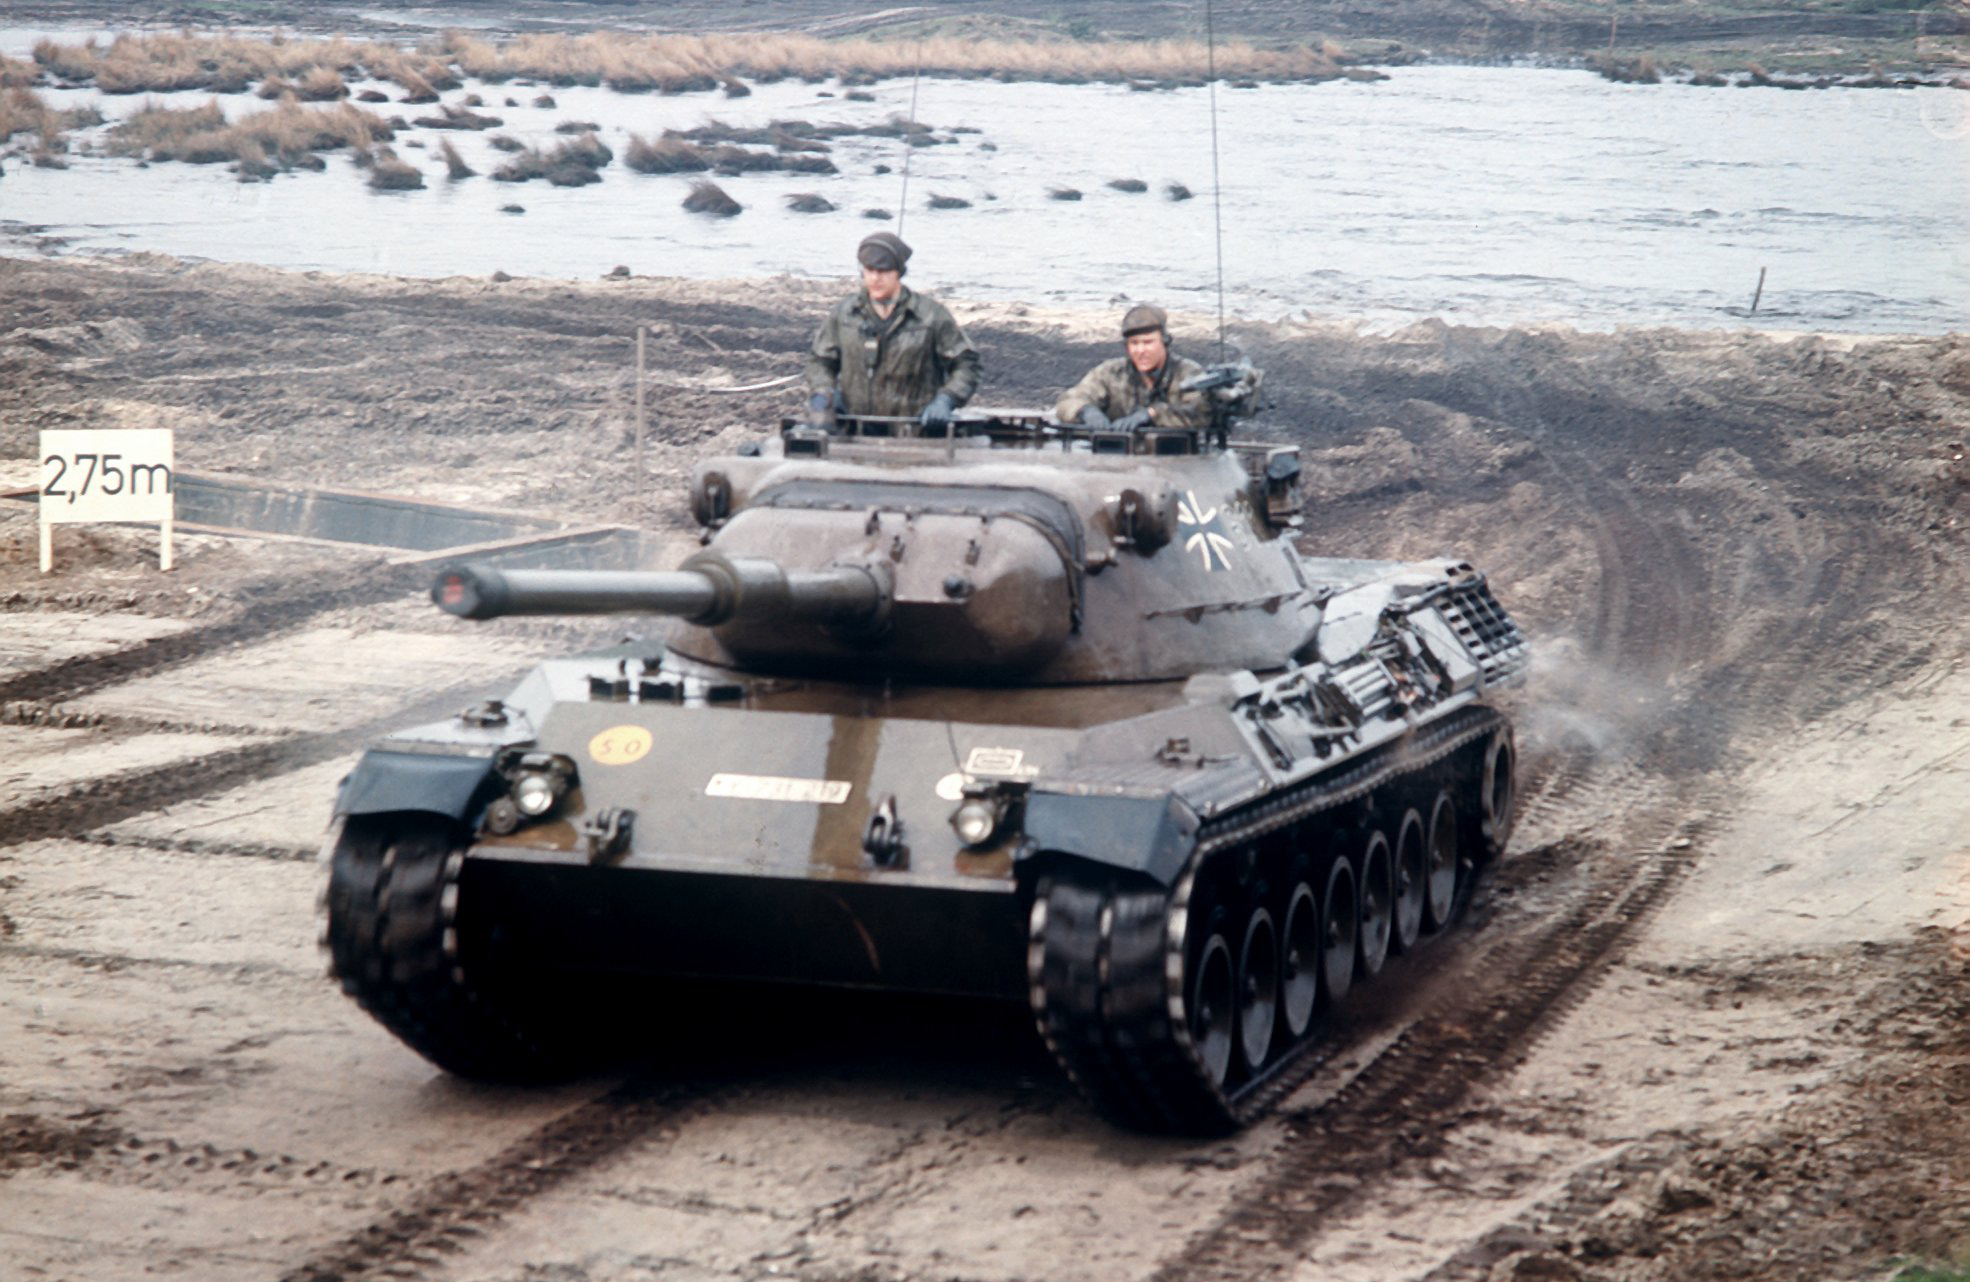 A Leopard 1 tank of the German Bundeswehr during military exercises in the field.